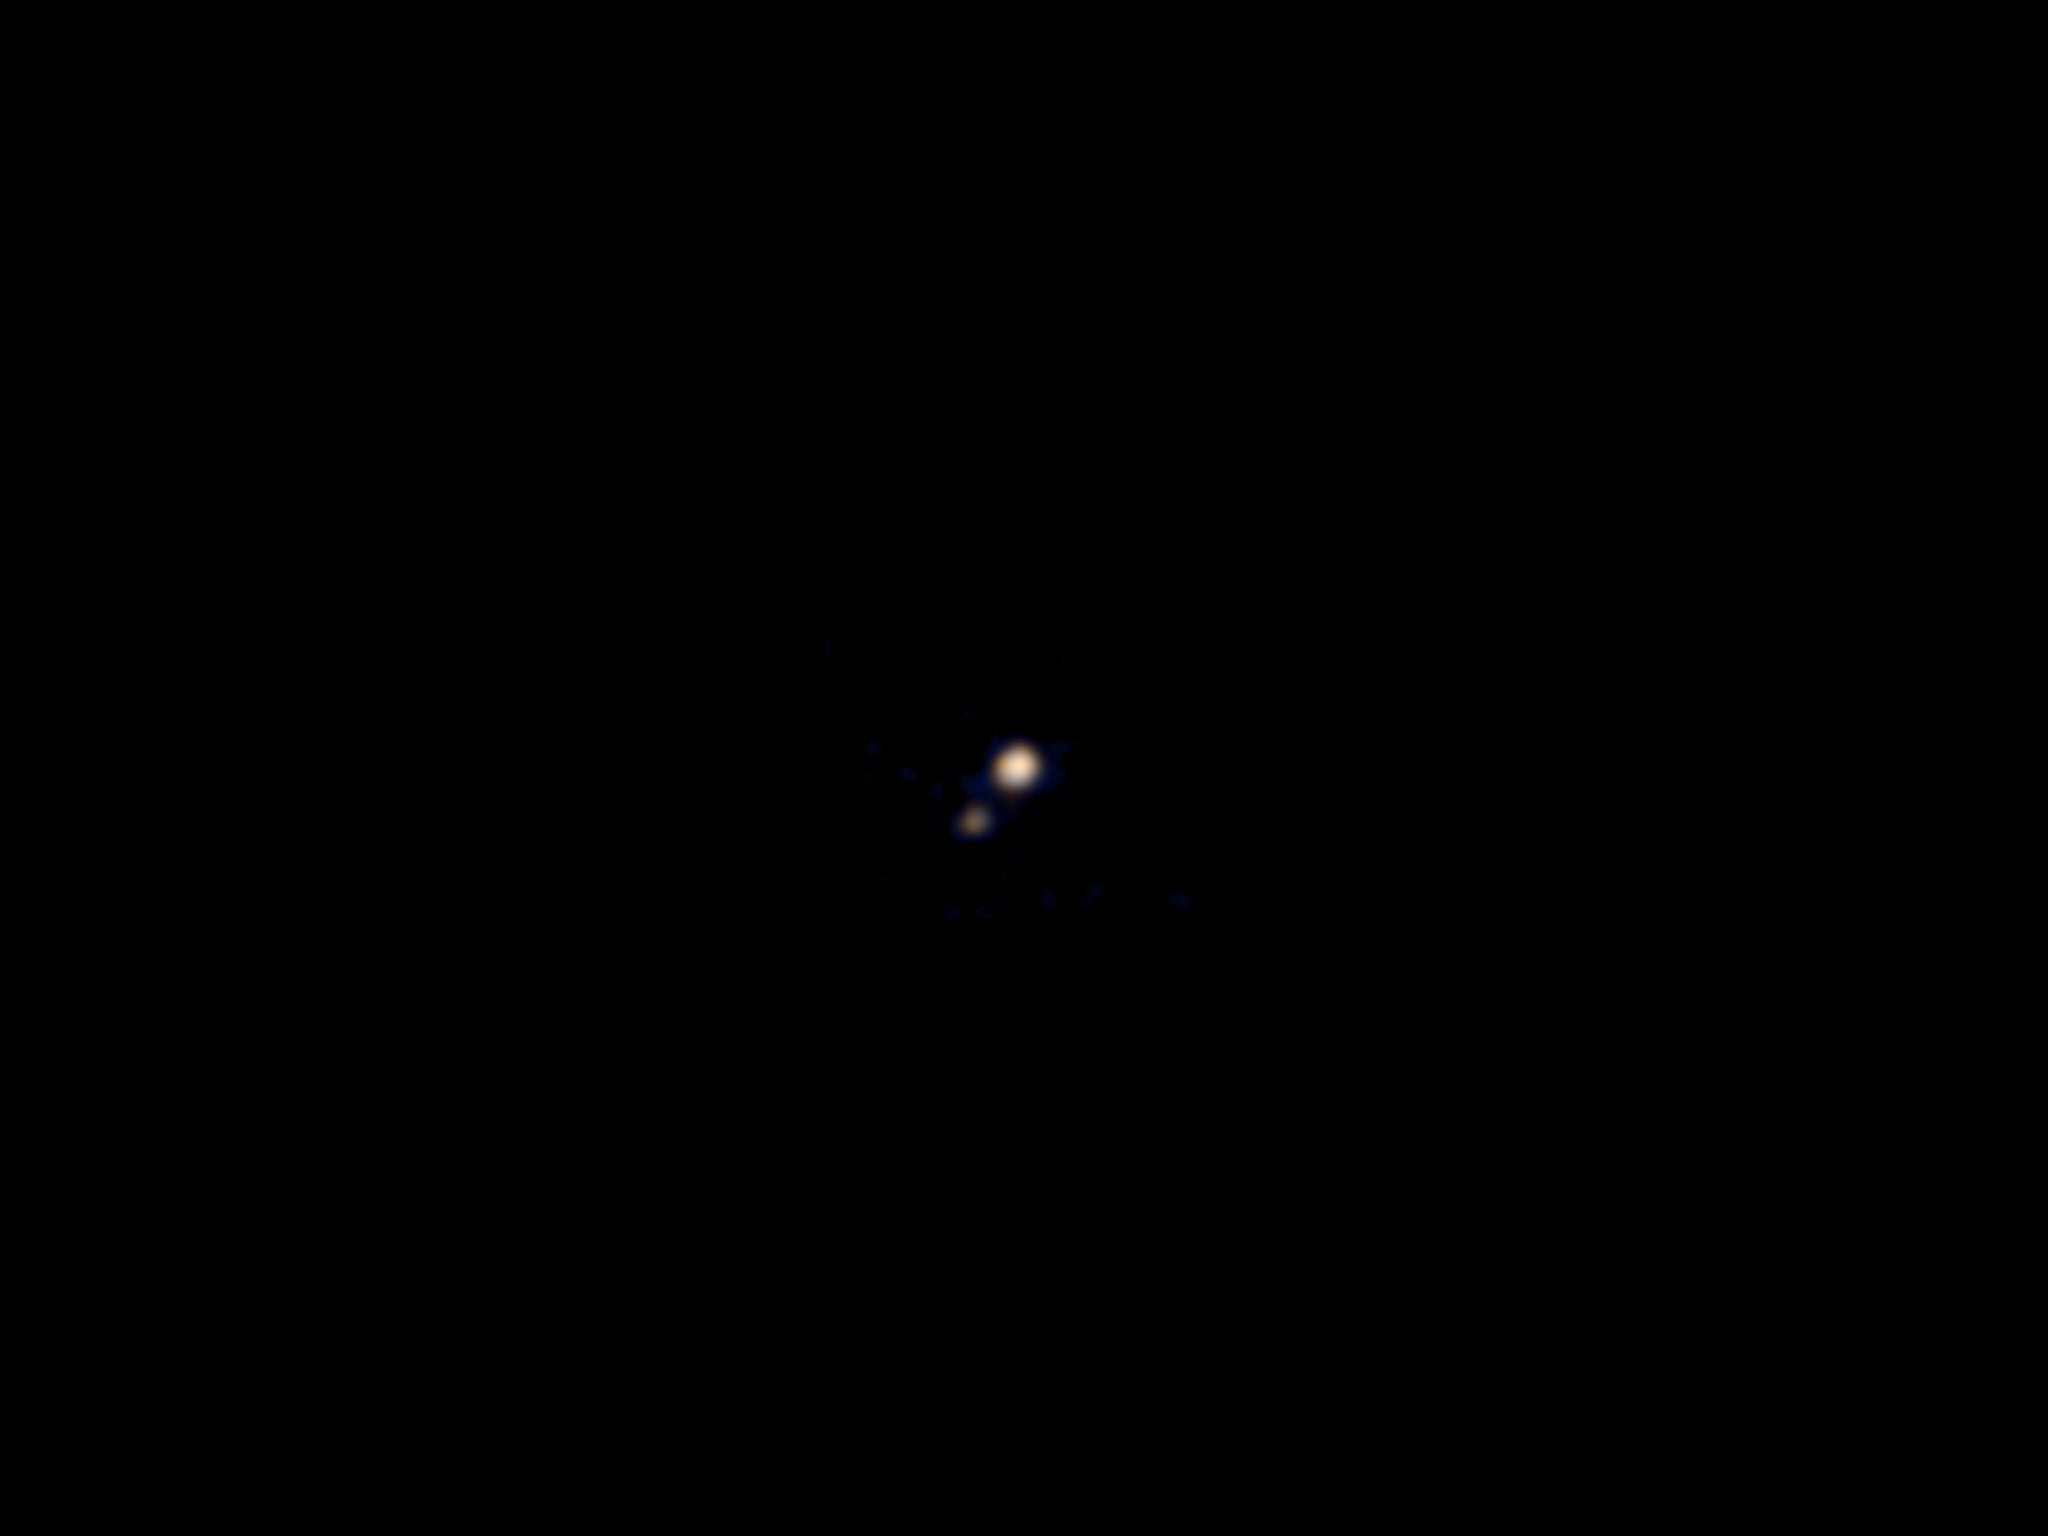 This image of Pluto and its largest moon, Charon, was taken by the Ralph color imager aboard NASA’s New Horizons spacecraft on April 9 and downlinked to Earth the following day. It is the first color image ever made of the Pluto system by a spacecraft on